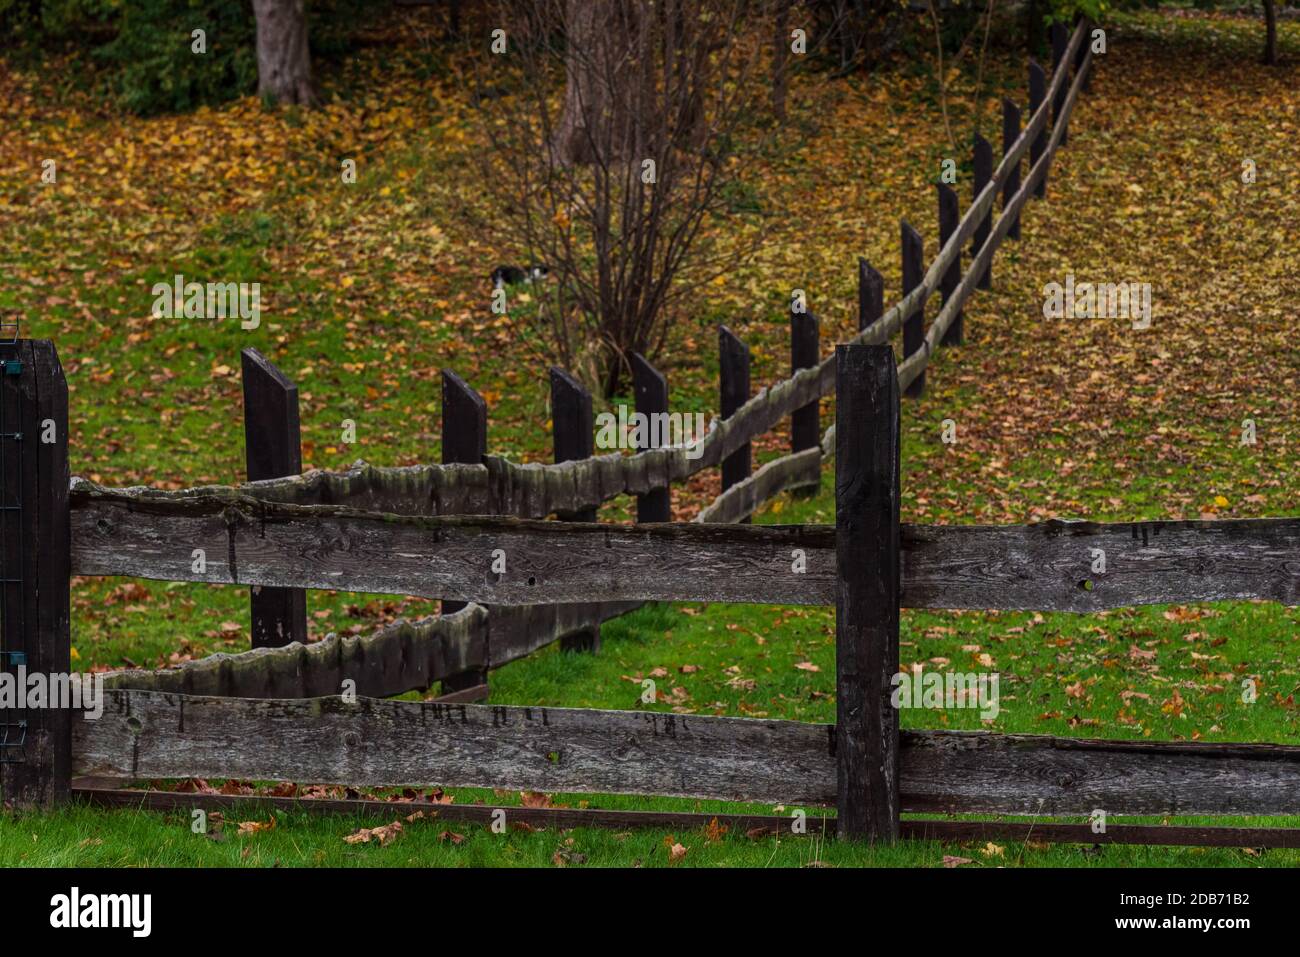 dark horizontal wooden fence with wide boards and a green lawn on which leaves from nearby tree branches have fallen Stock Photo